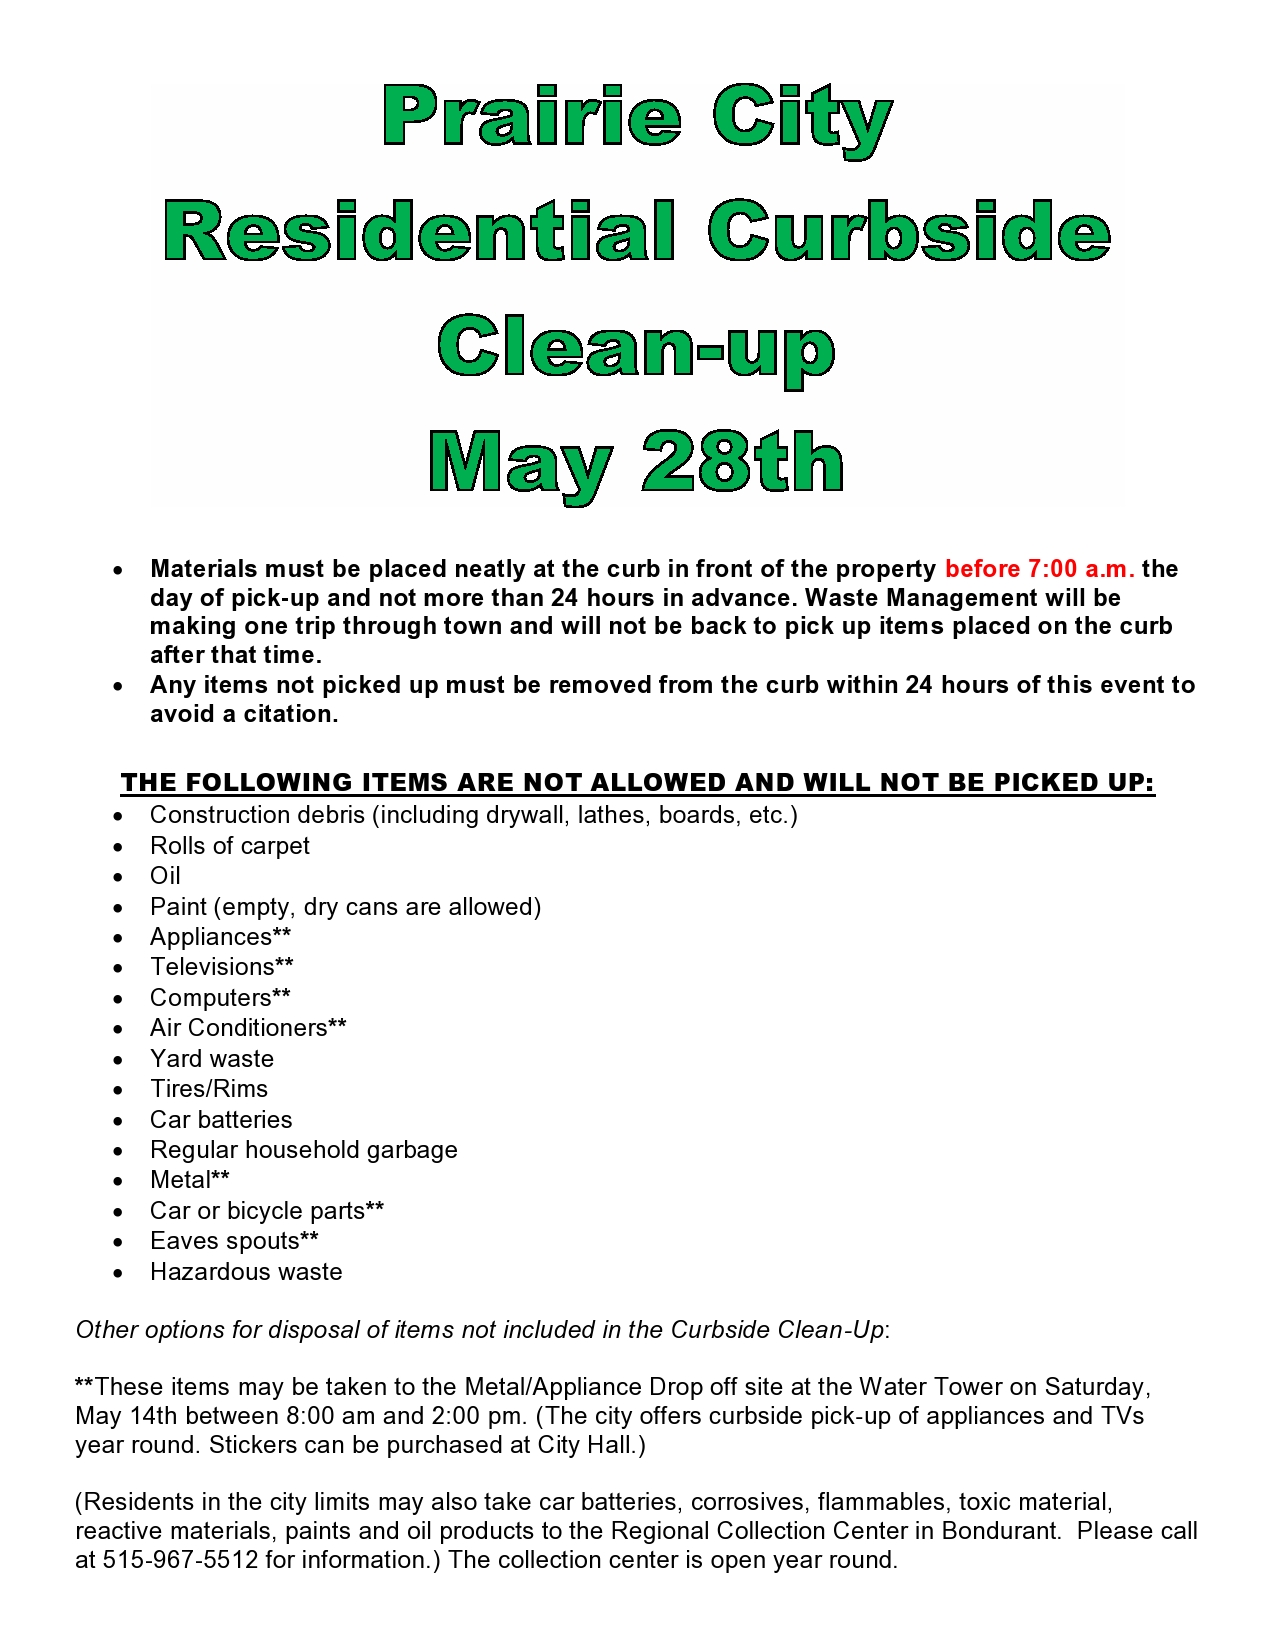 Curbside Clean-up Day